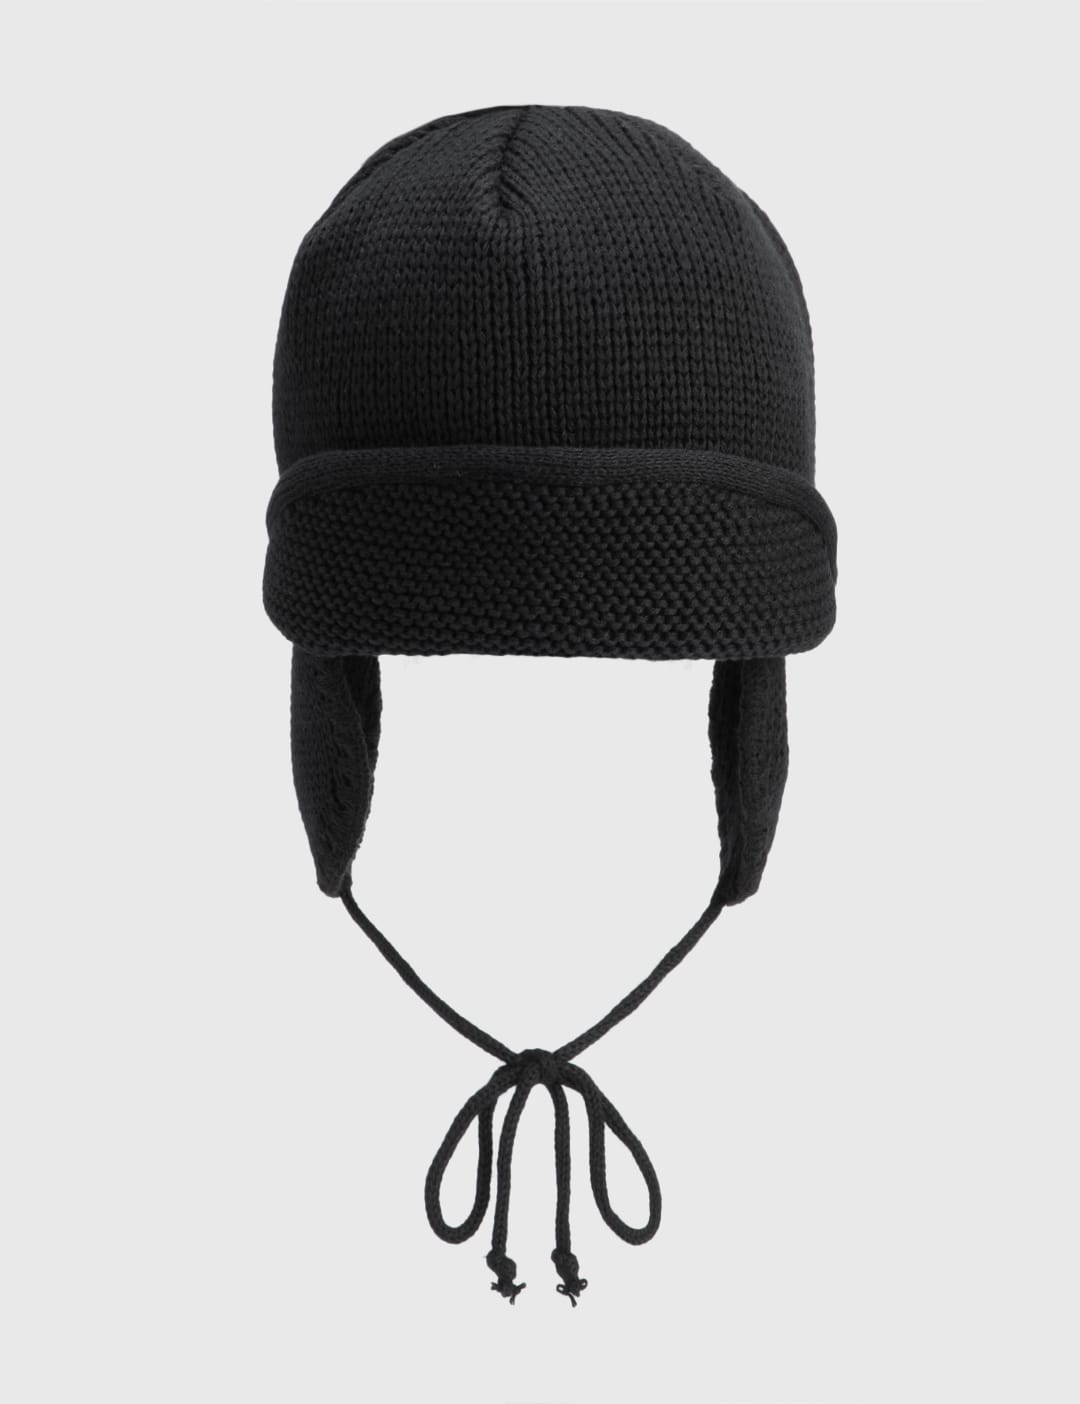 TIGHTBOOTH - Flight Beanie | HBX - Globally Curated Fashion and Lifestyle  by Hypebeast